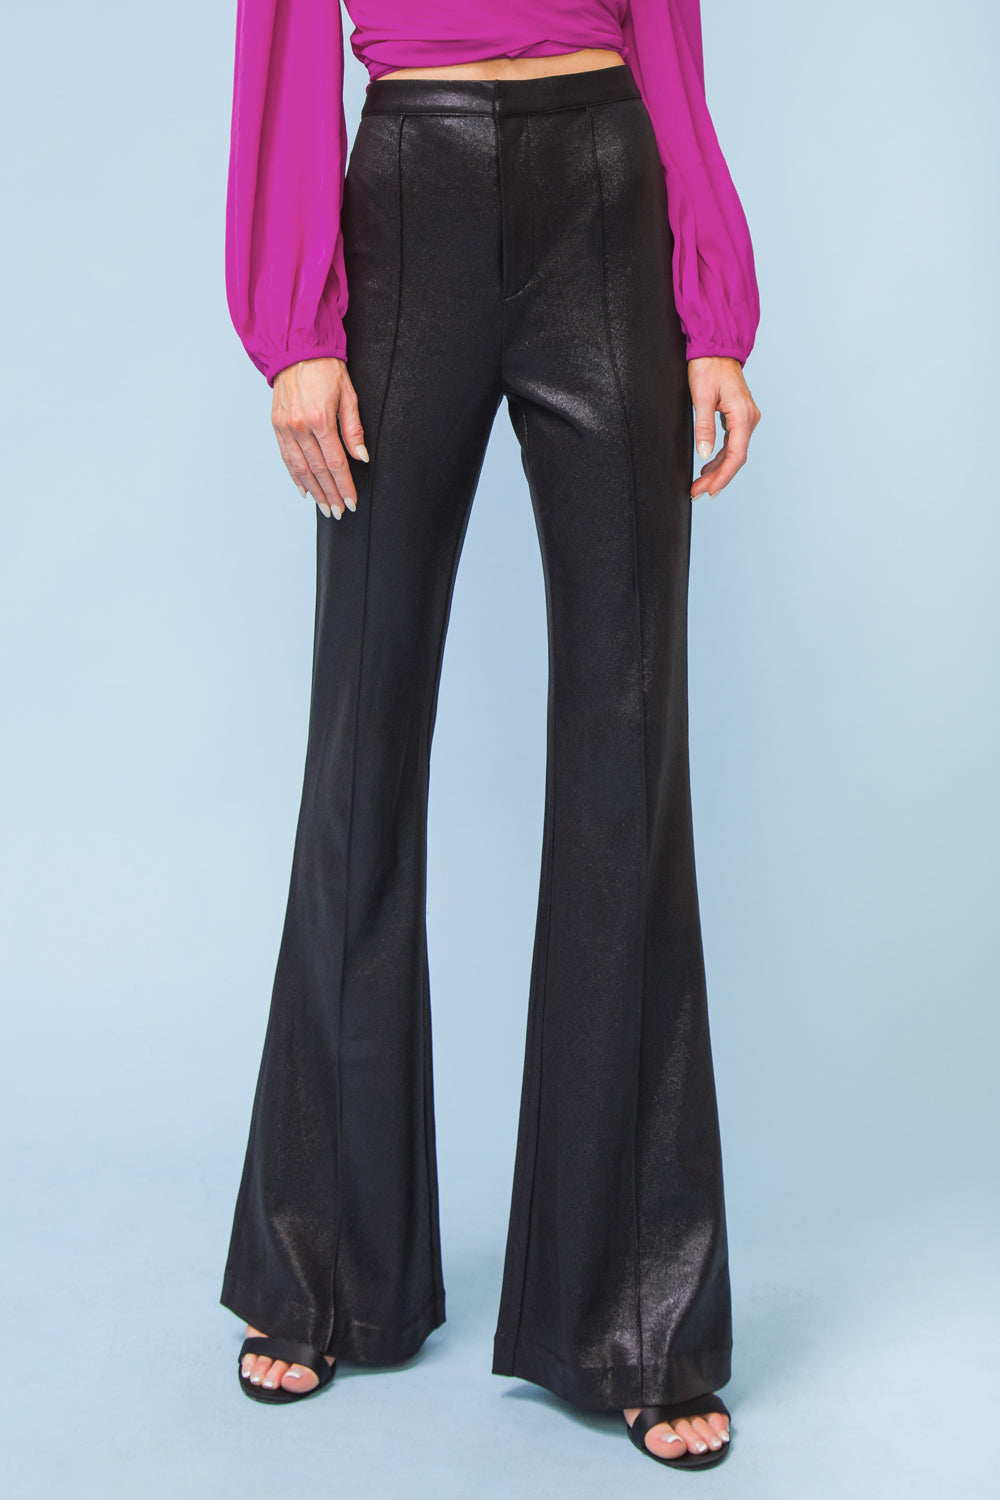 ANAIS FLAUX LEATHER FLARES – The Boutique at Mira's